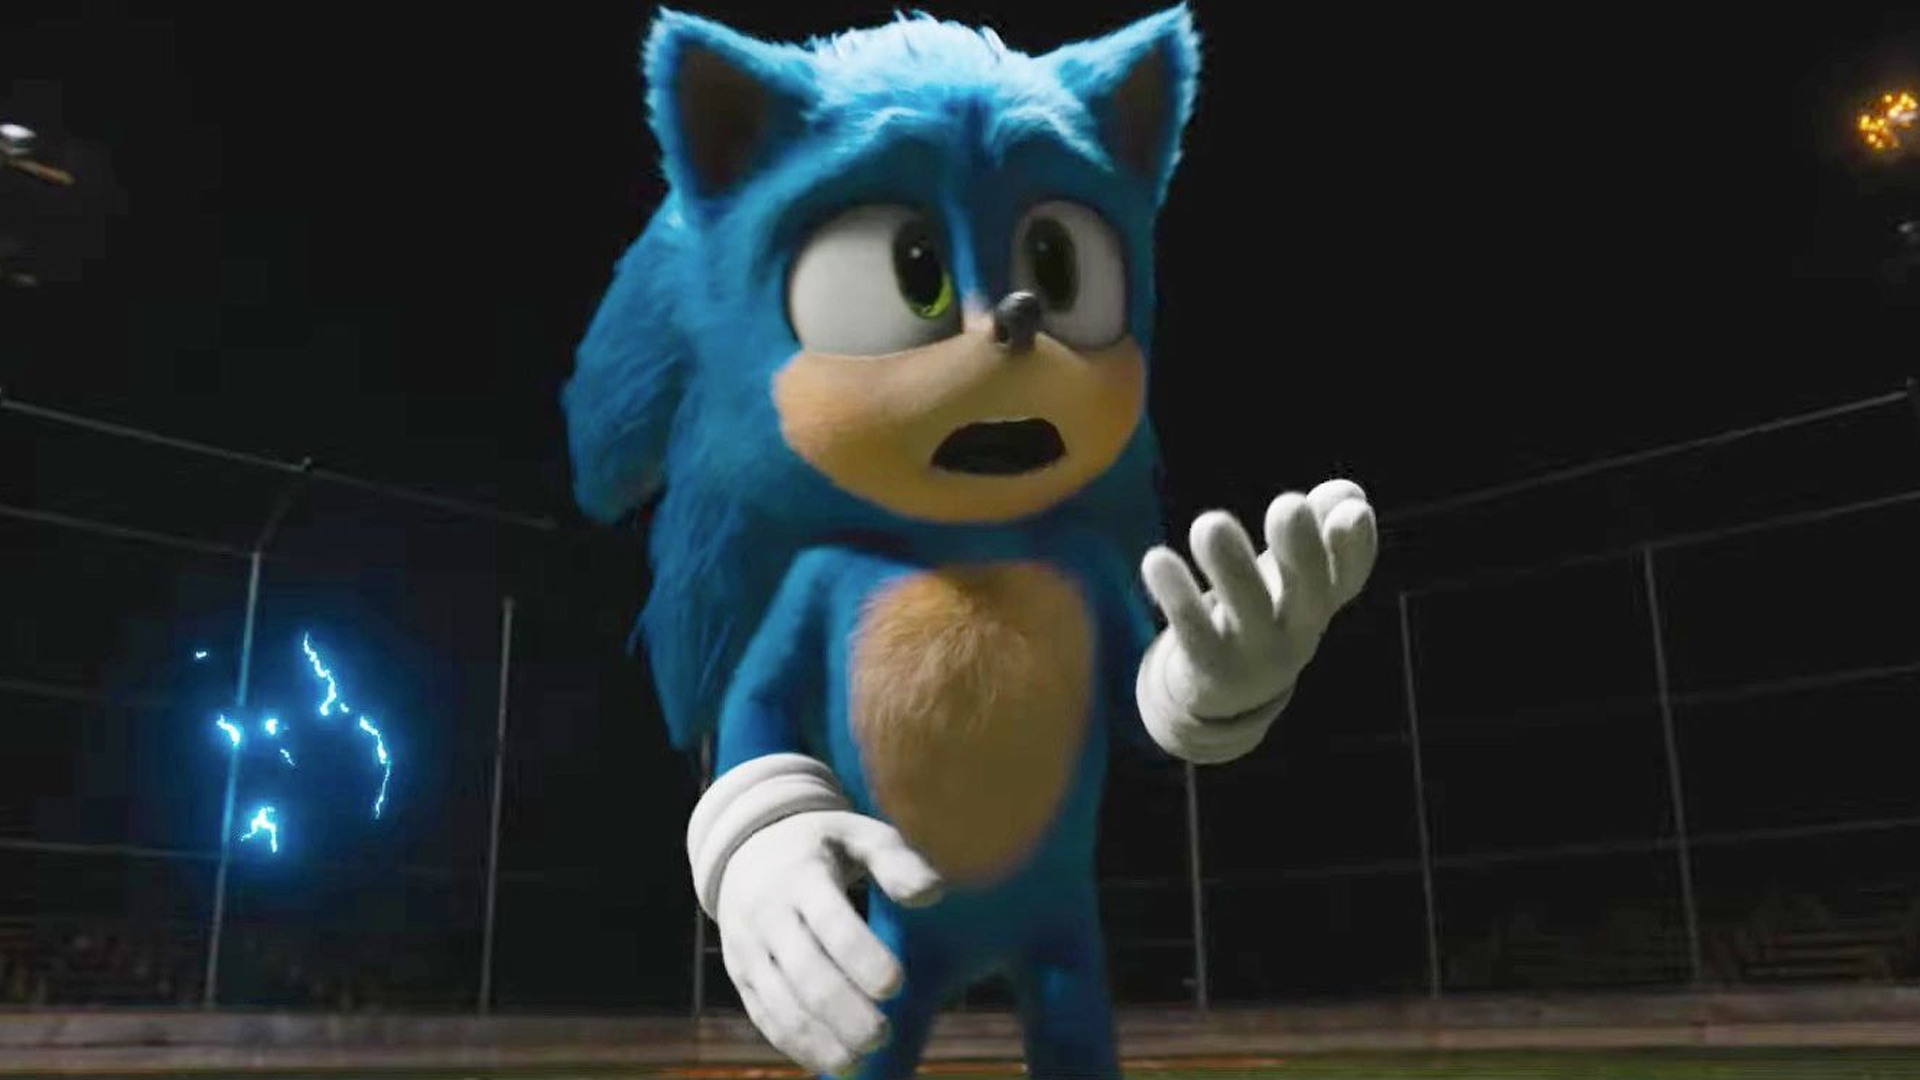 The Weirdest Part Of The Sonic Movie Is A Giant Owl